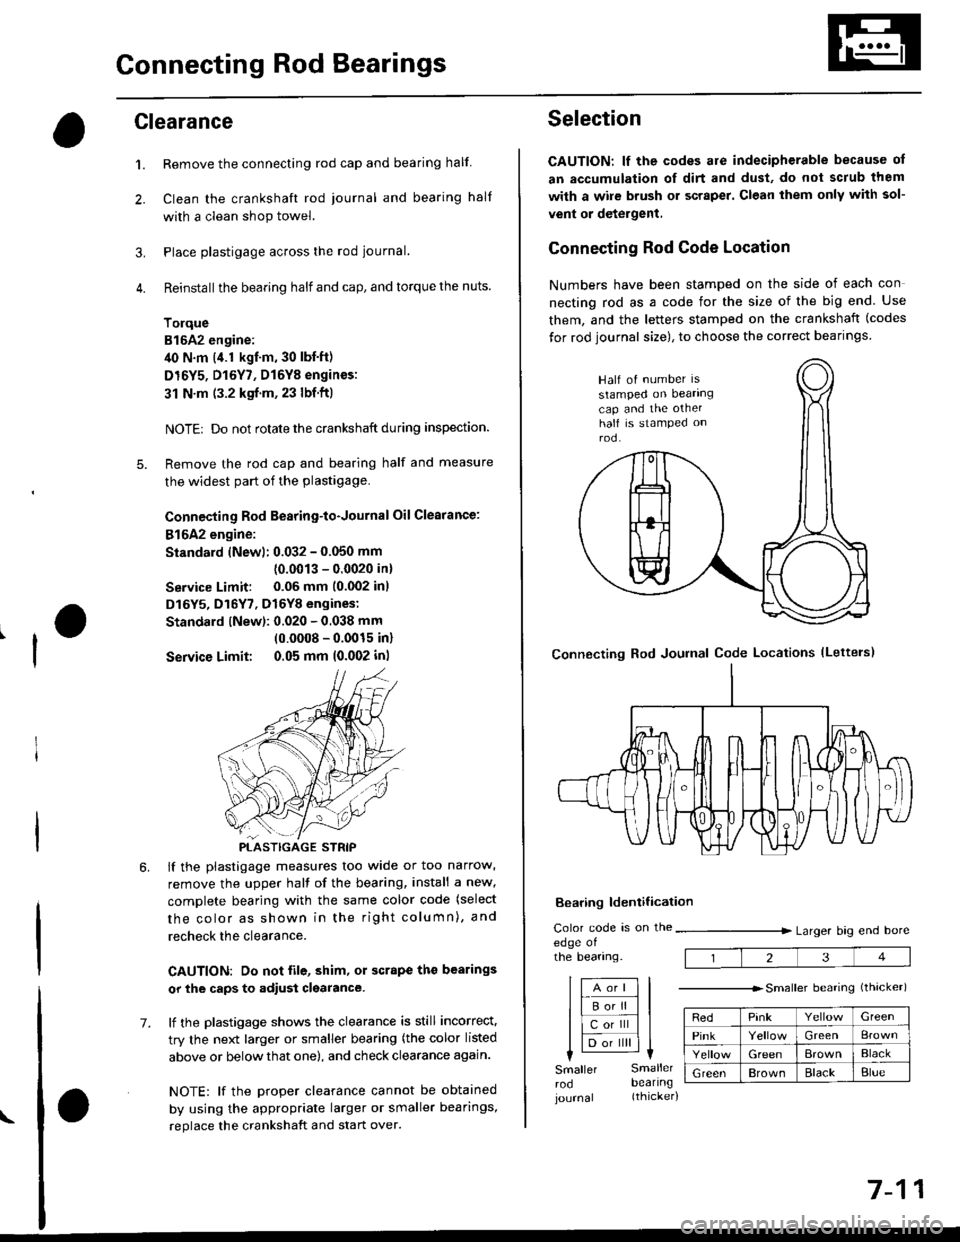 HONDA CIVIC 2000 6.G Repair Manual Connecting Rod Bearings
Clearance
Remove the connecting rod cap and bearing half
Clean the crankshaft rod iournal and bearing half
with a clean shop towel.
Place plastigage across the rod journal.
Rei